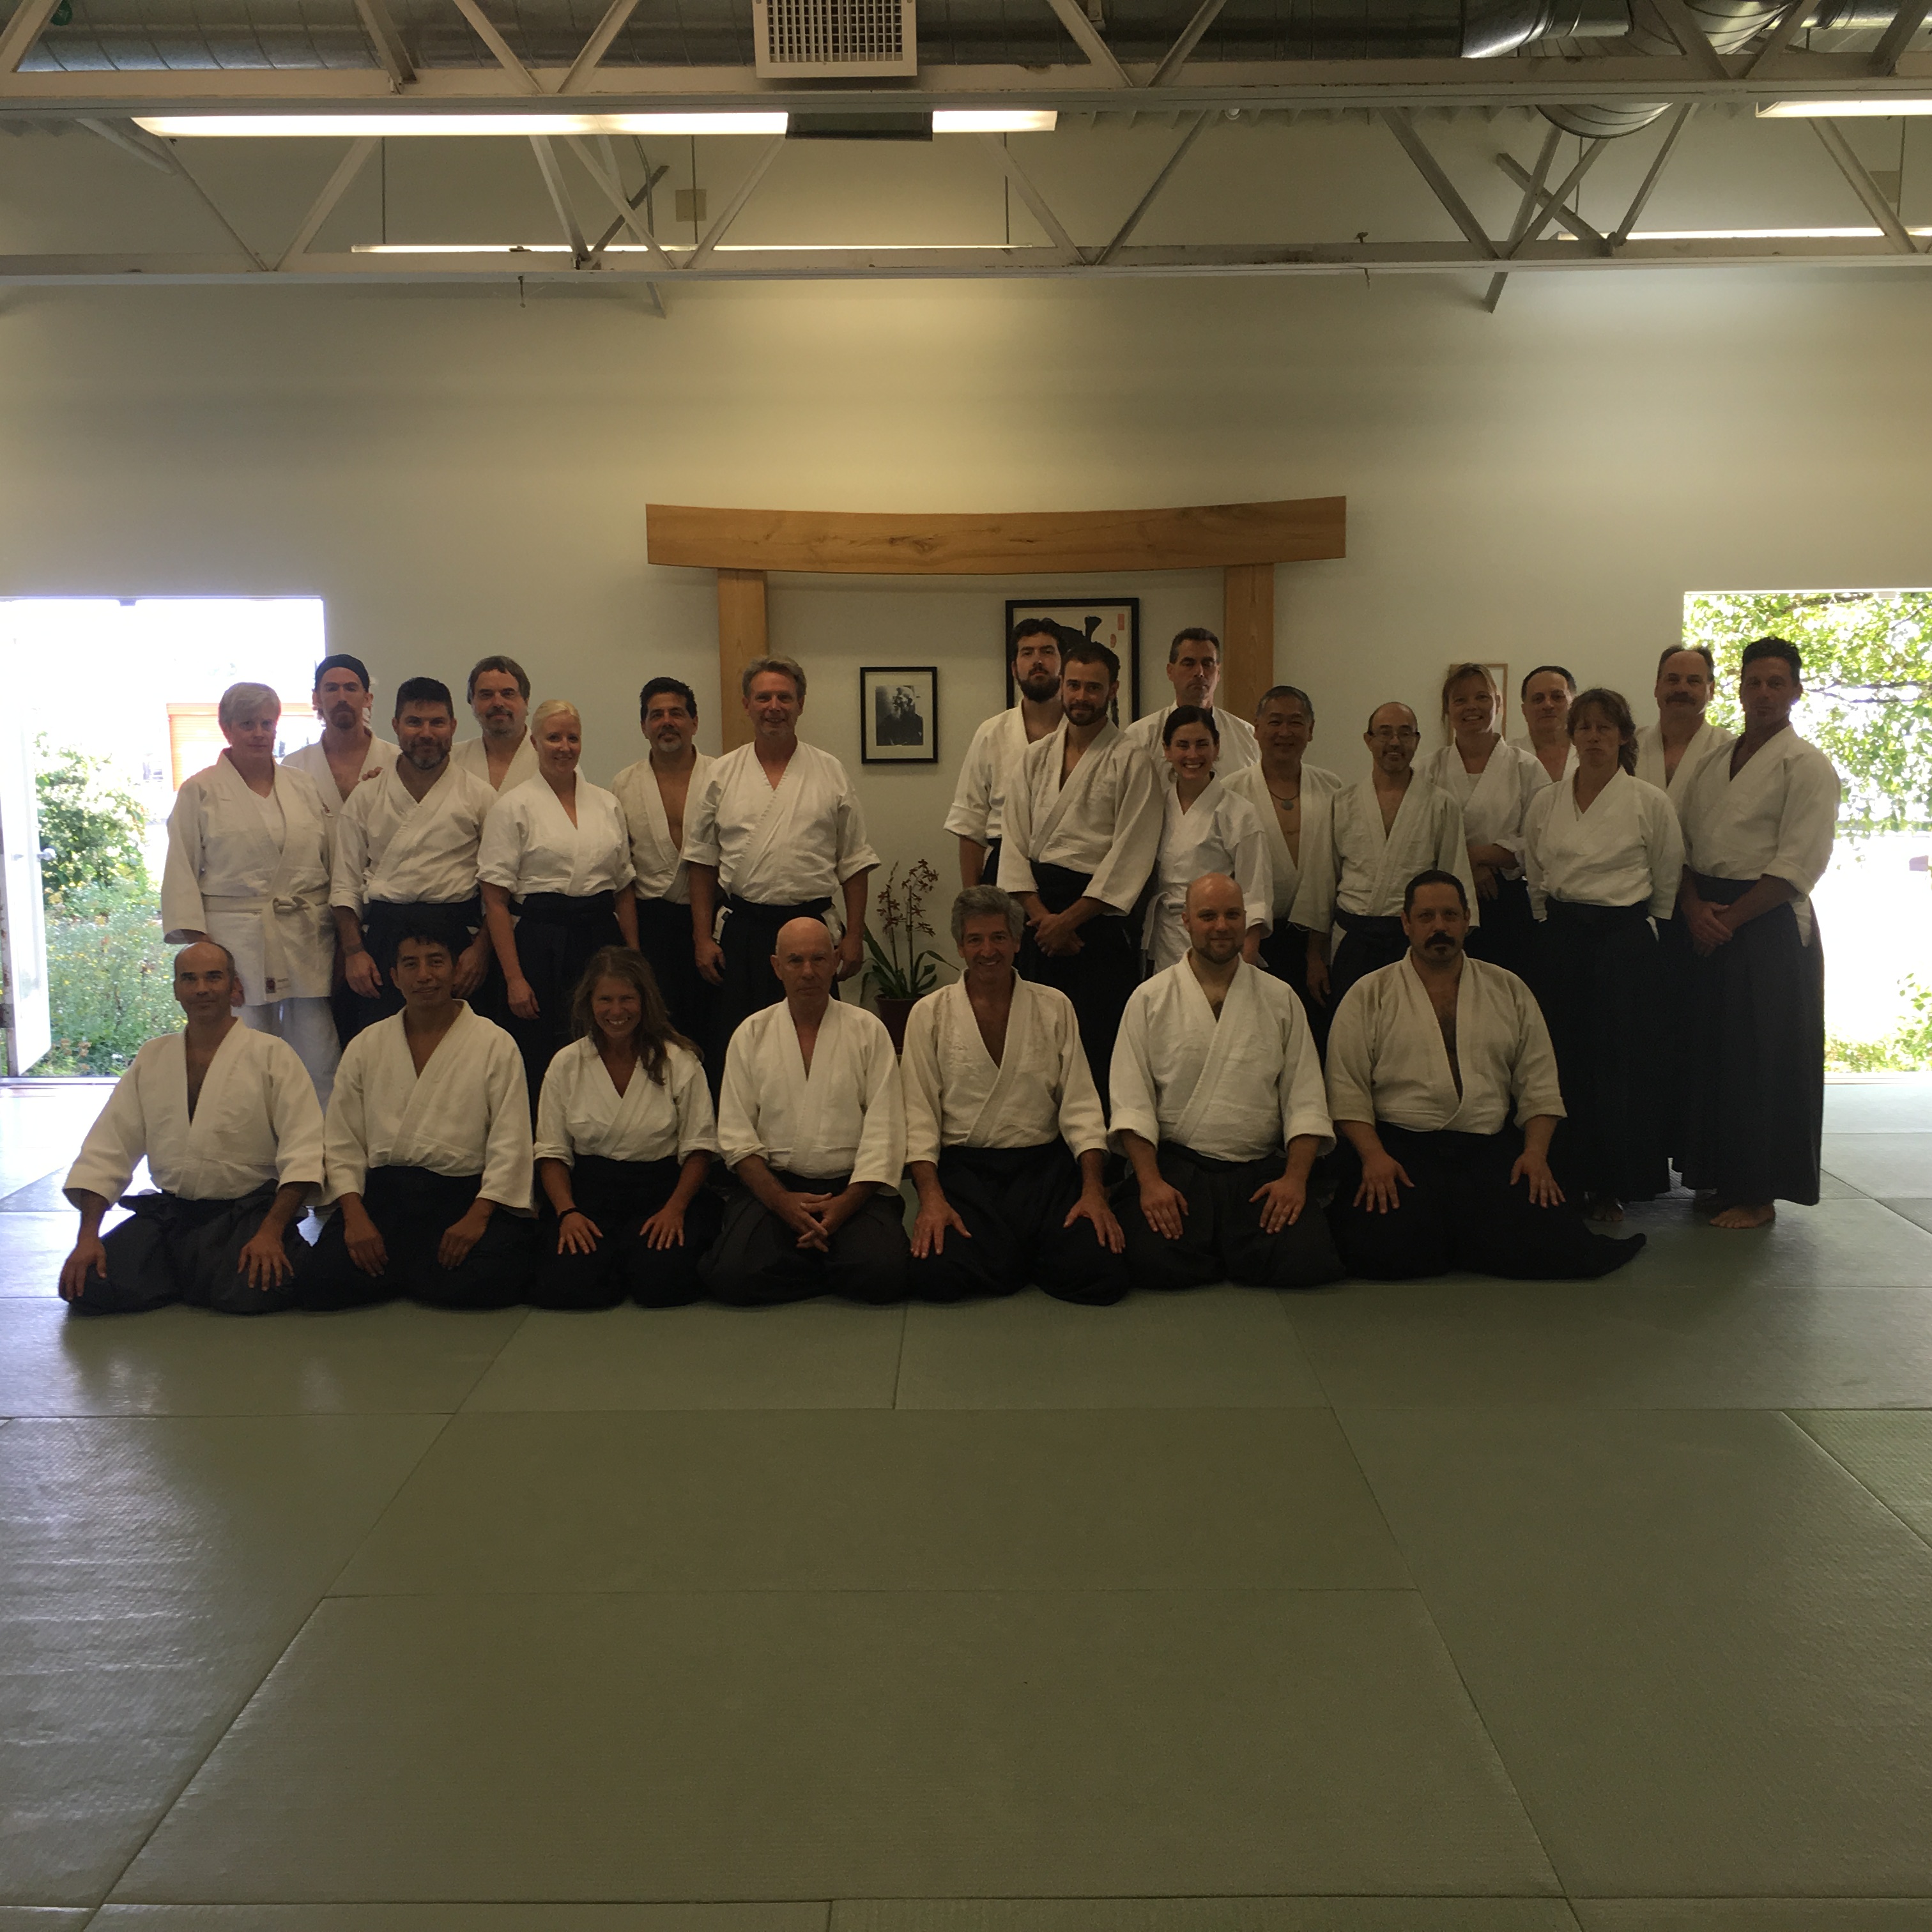 With many of the same benefits of yoga, Aikido offers physical fitness, self-defense and more in a non-competitive environment.